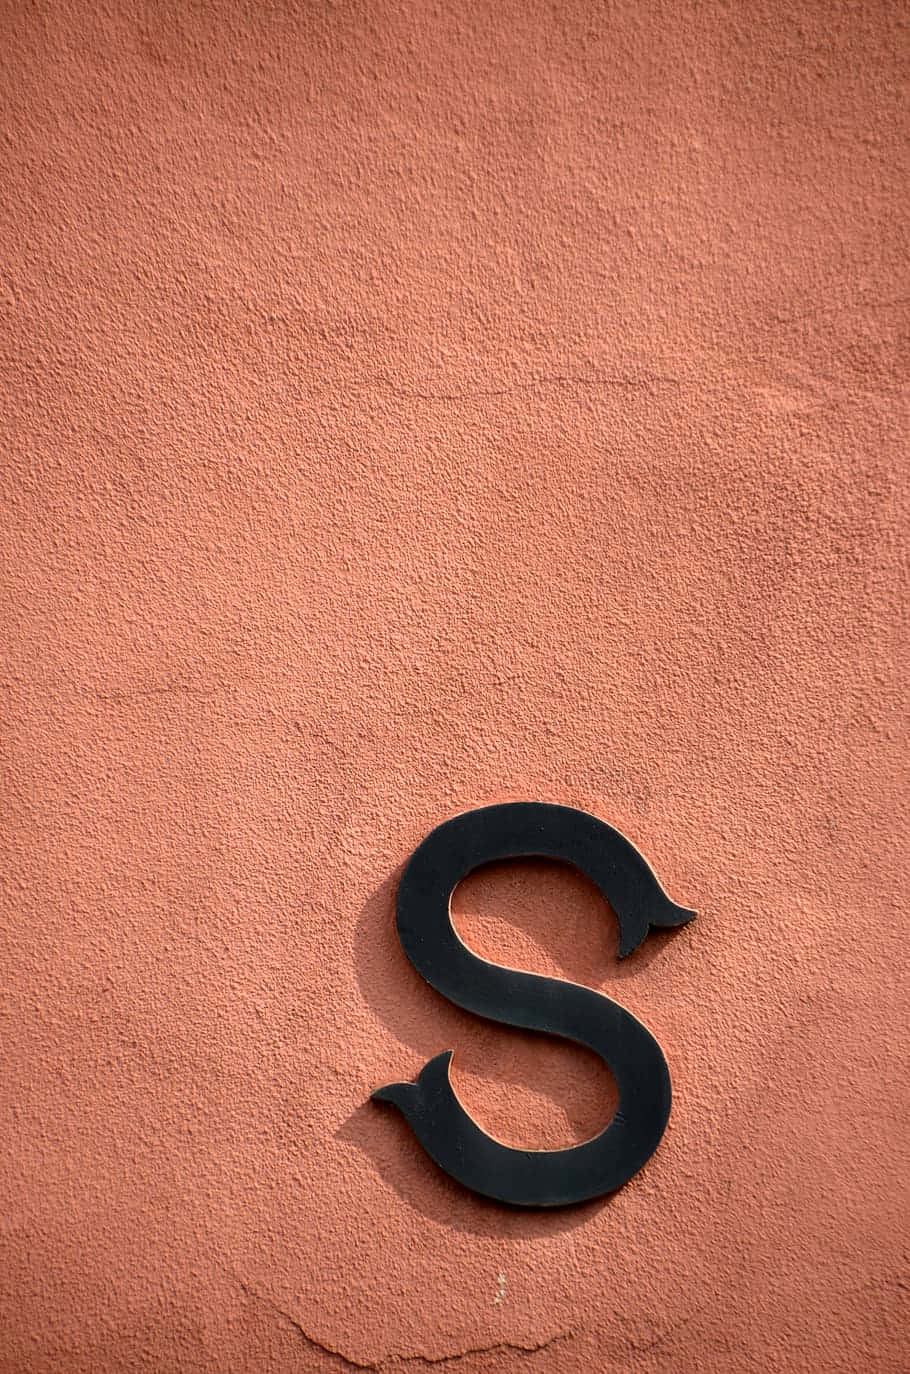 A Black Letter S On A Wall